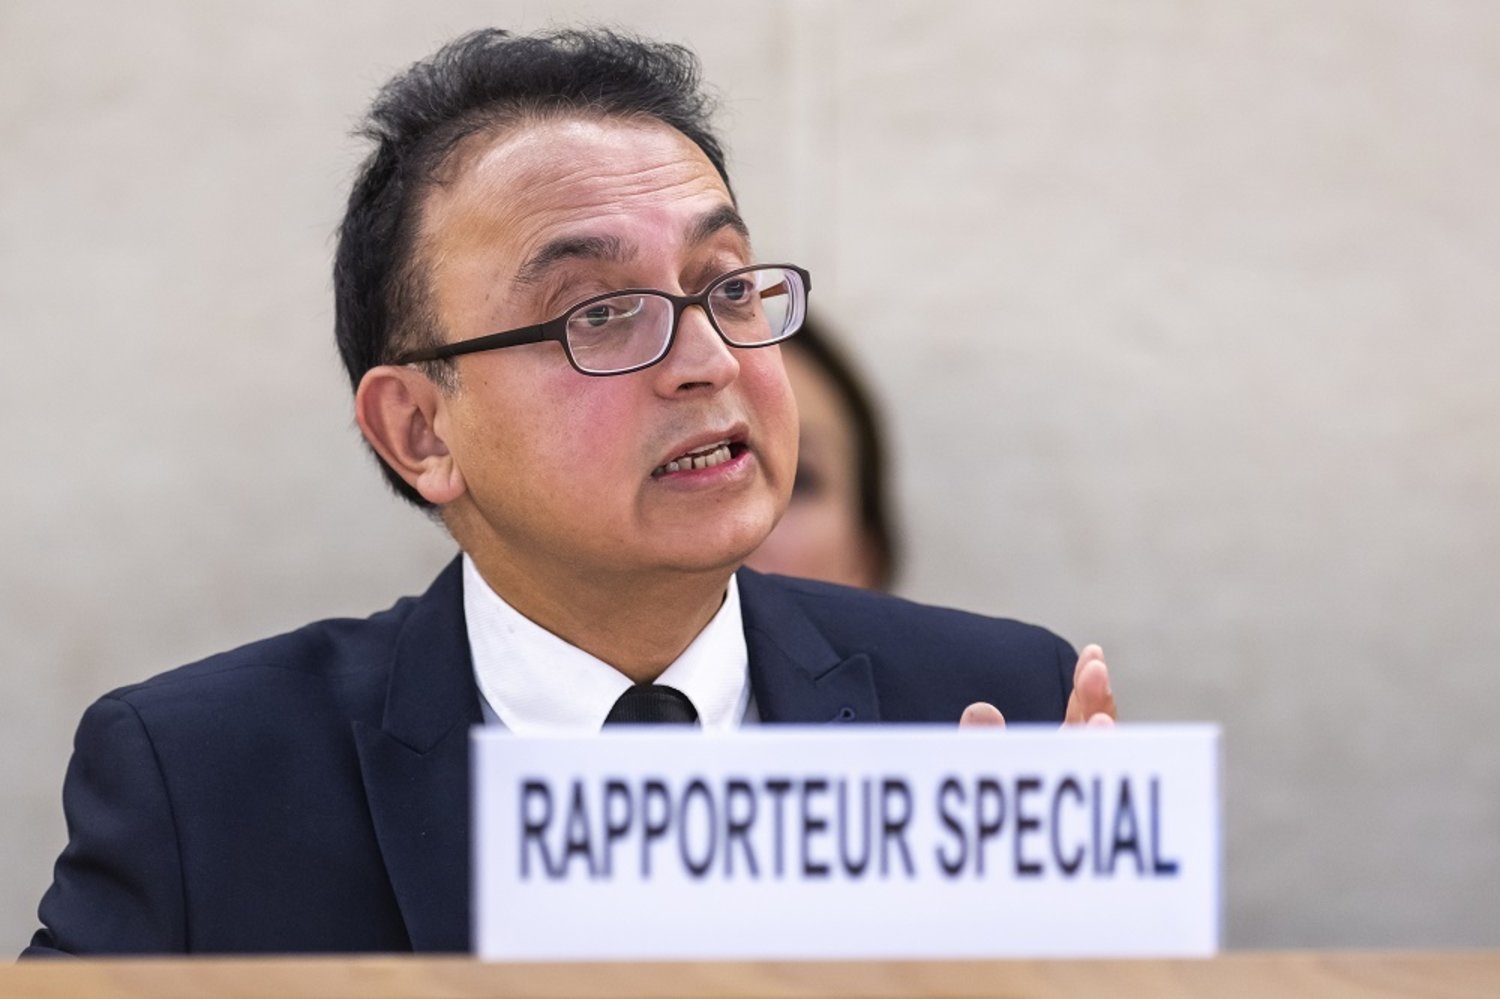 The mandate of the UN special rapporteur and fact-finding committee on human rights in Iran has been extended